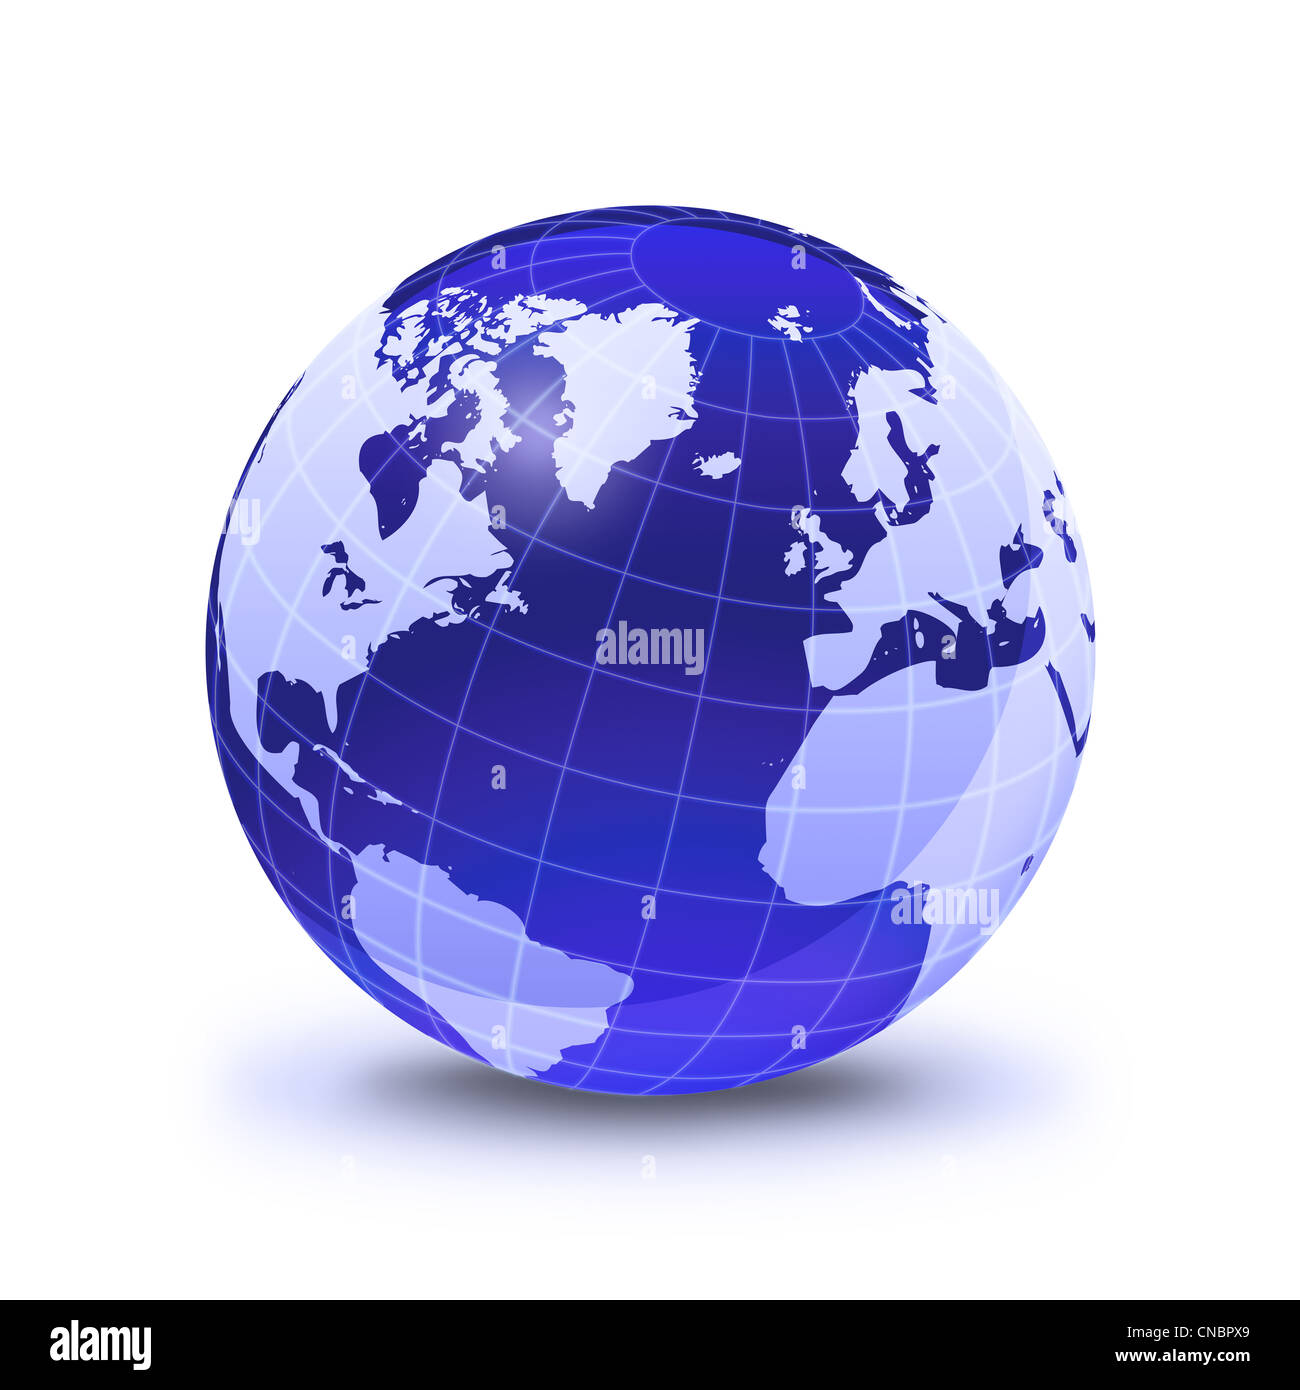 Earth globe stylized, in blue color shiny and with white glowing grid. On white surface with dropped shadow, Pacific Ocean view. Stock Photo